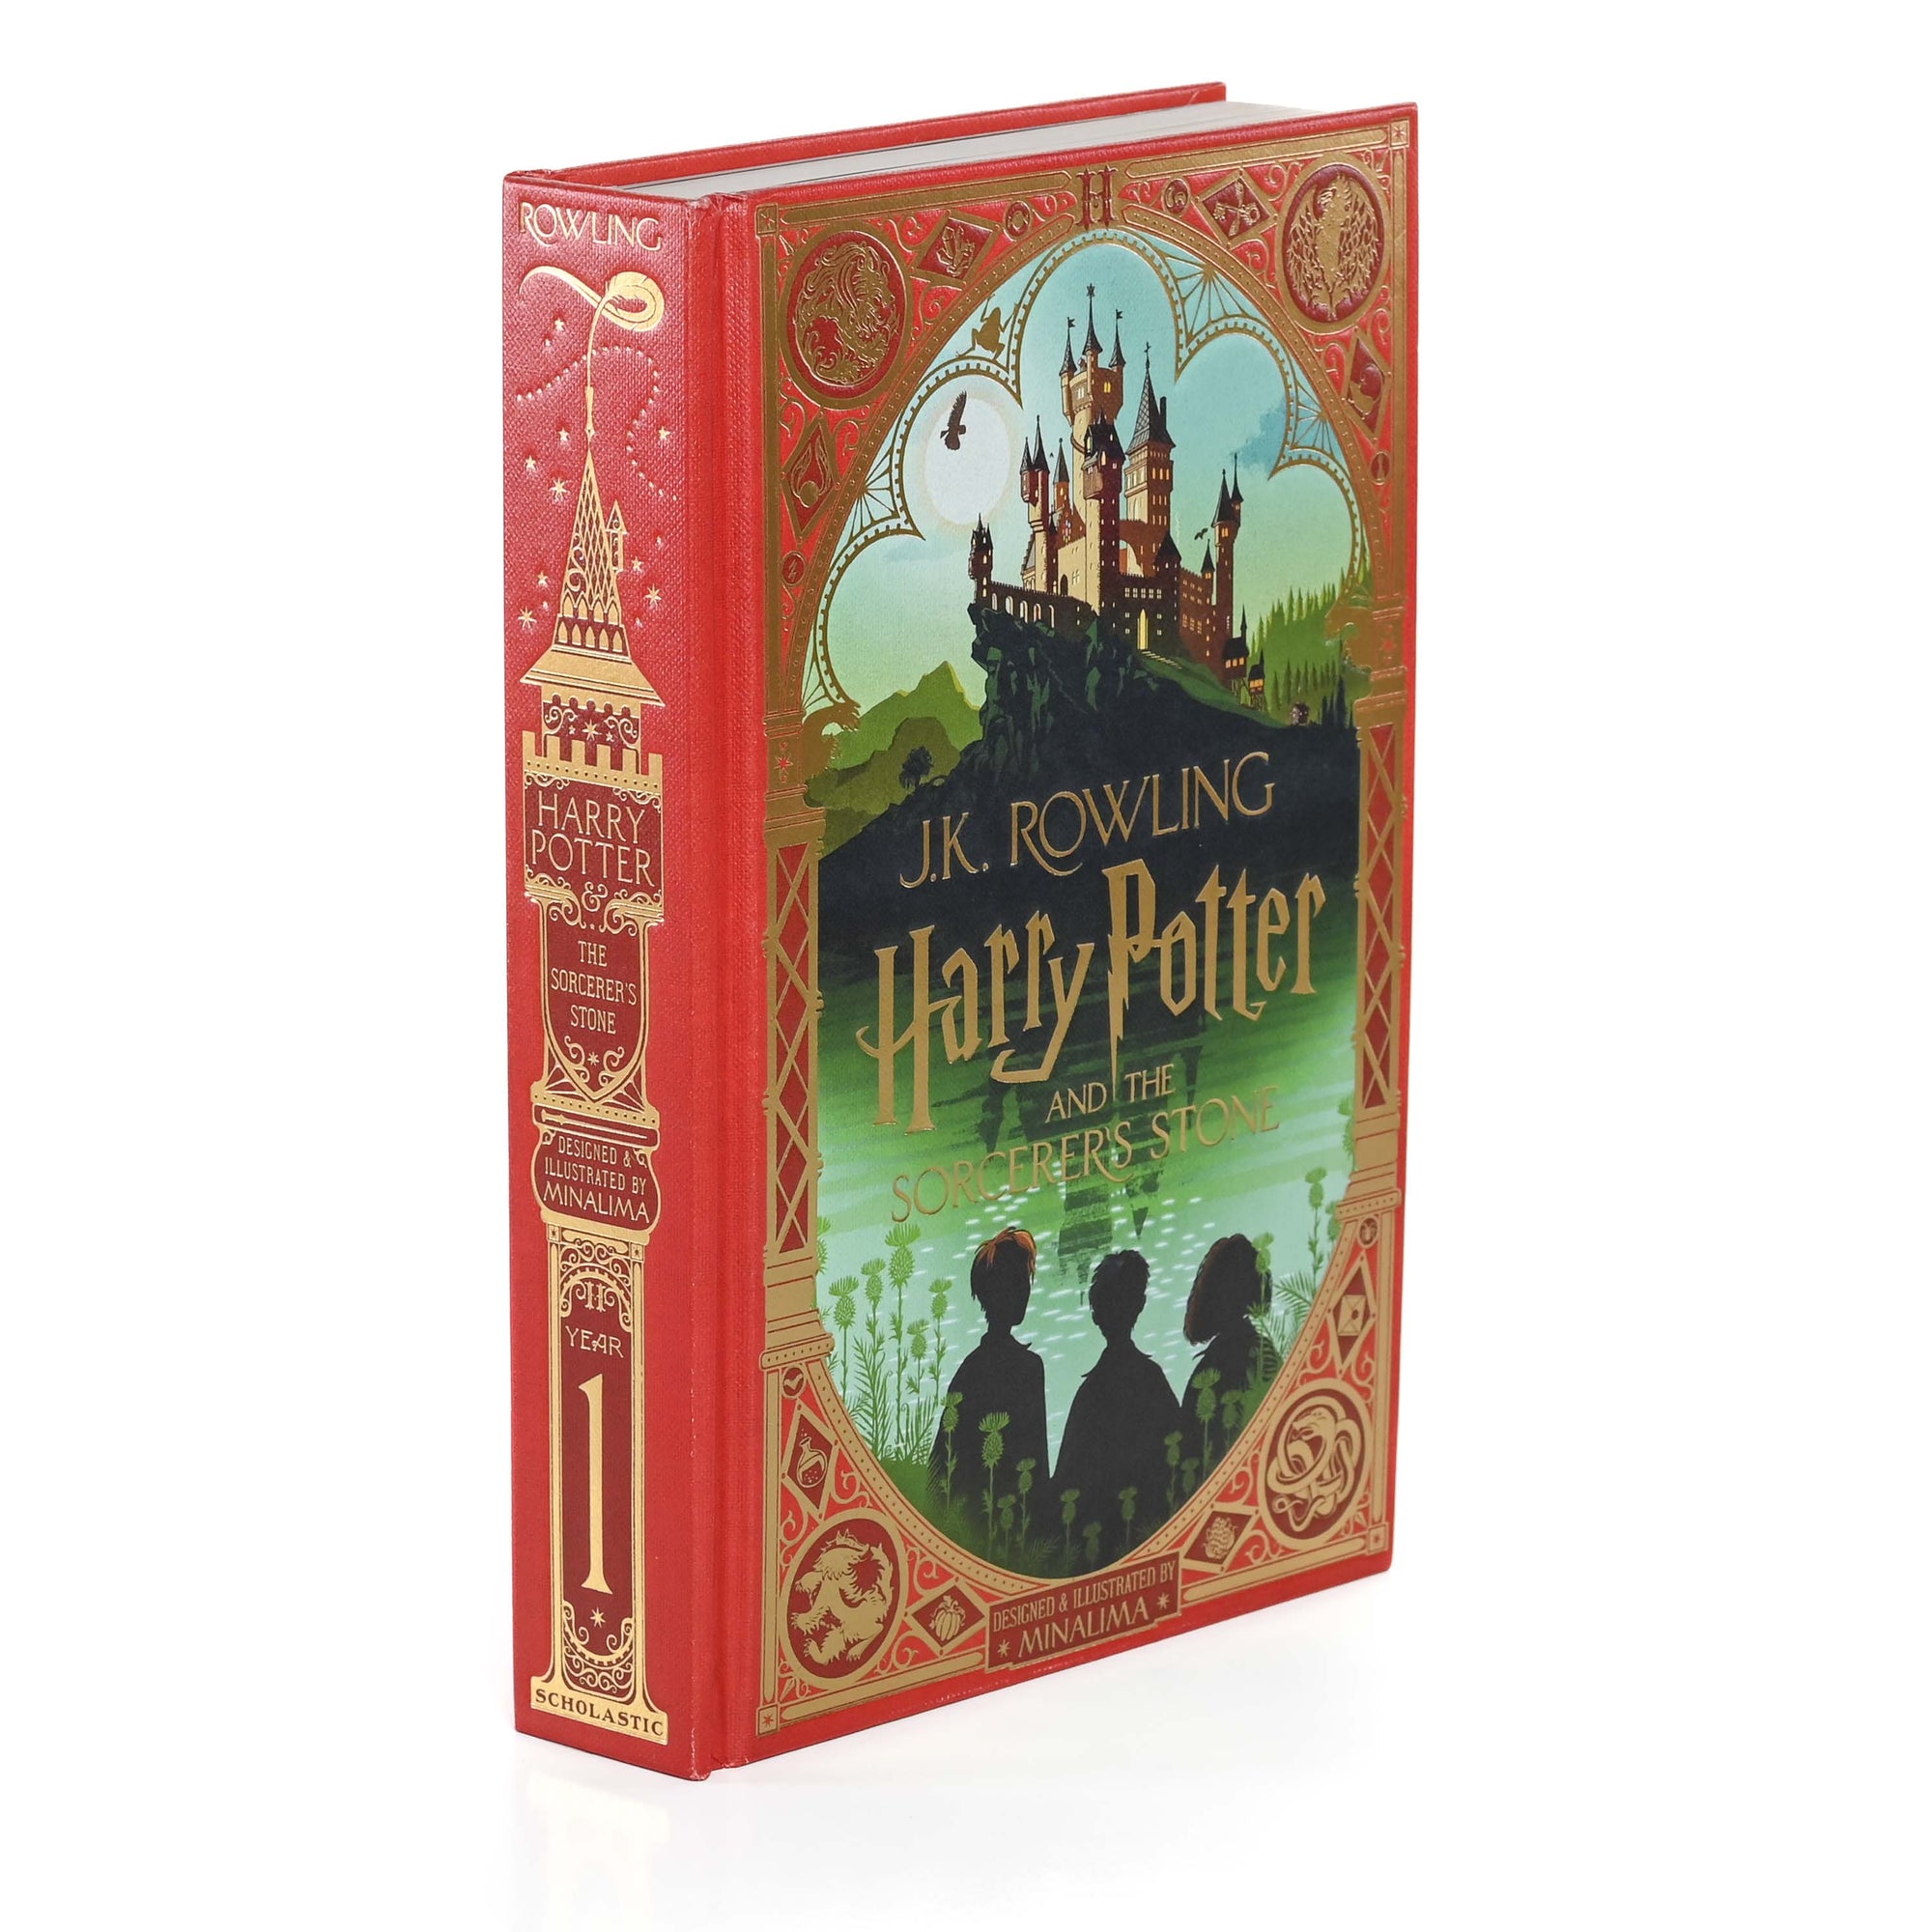 Harry Potter and the Sorcerer's Stone (Illustrated with Interactive Elements)